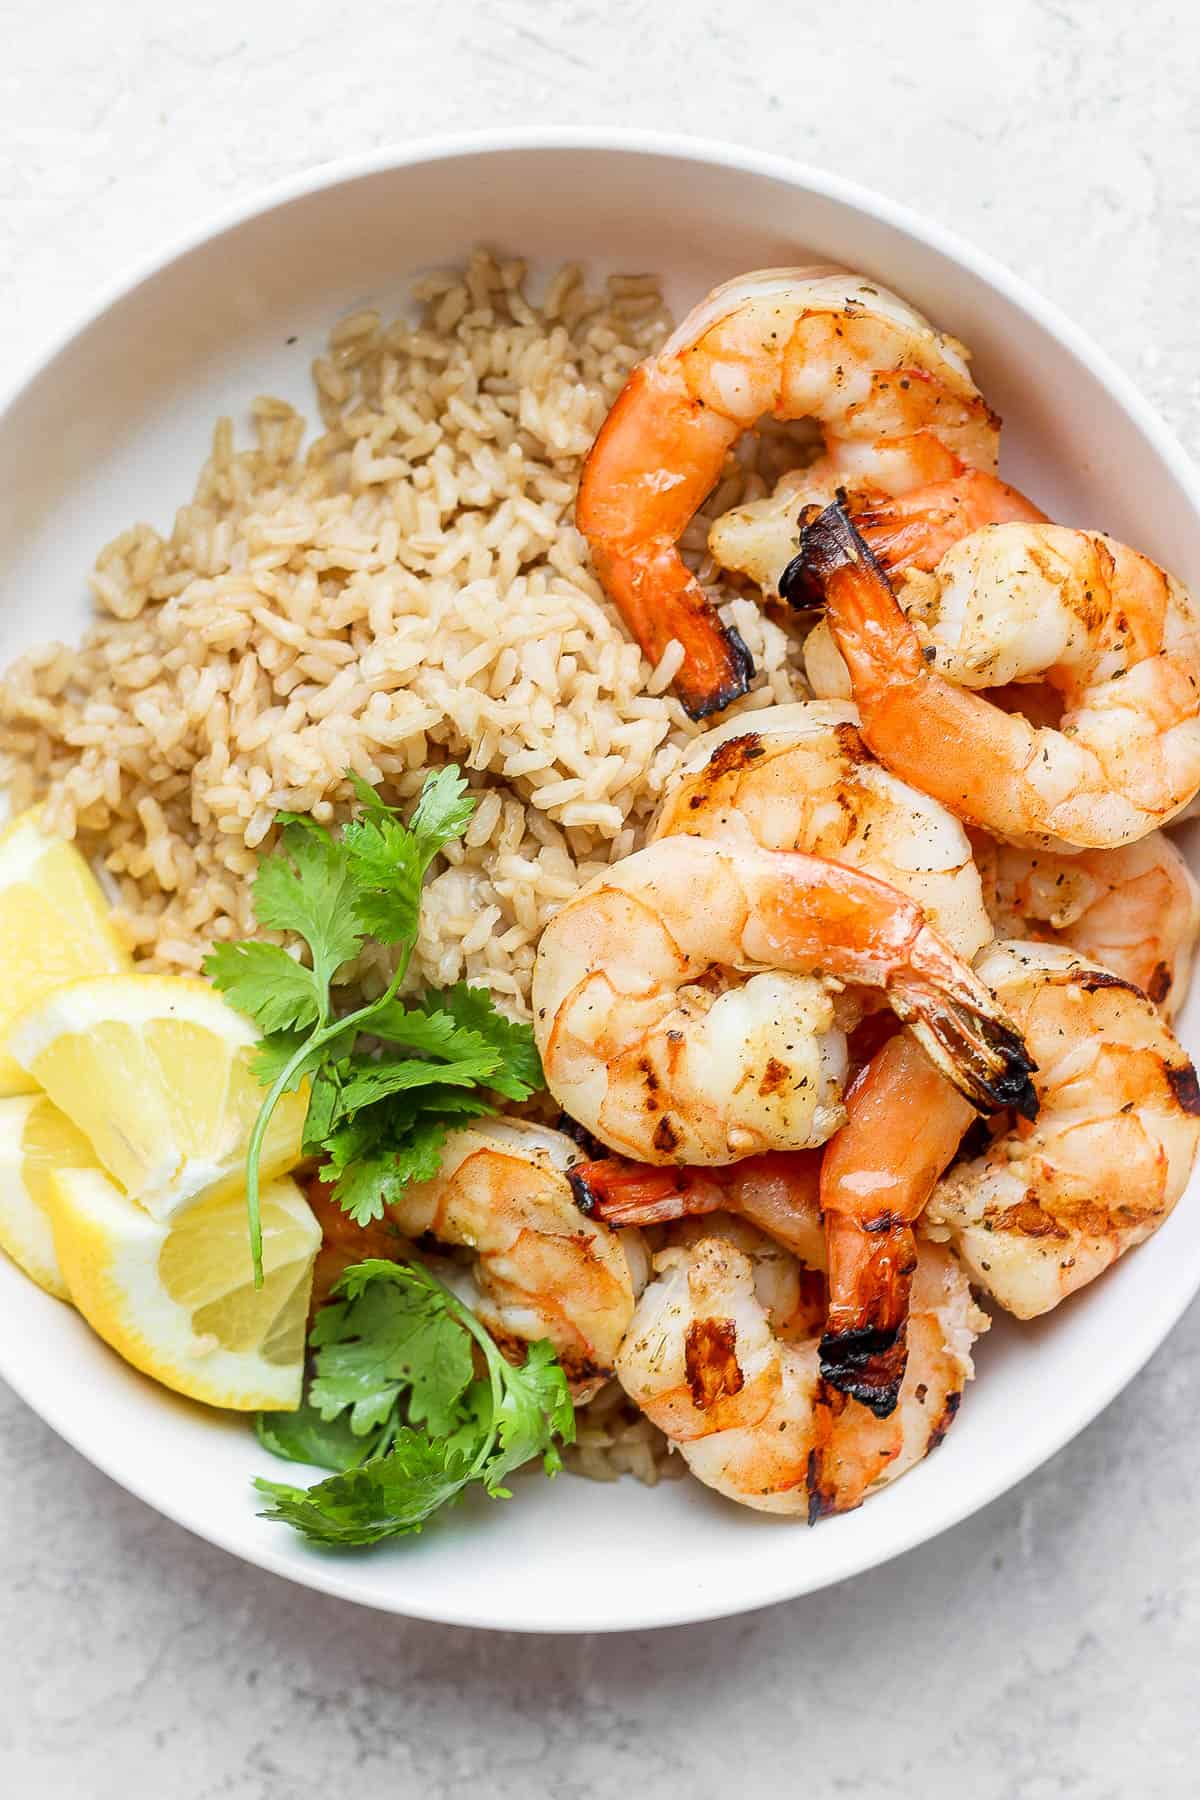 Grilled shrimp in a bowl with brown rice.